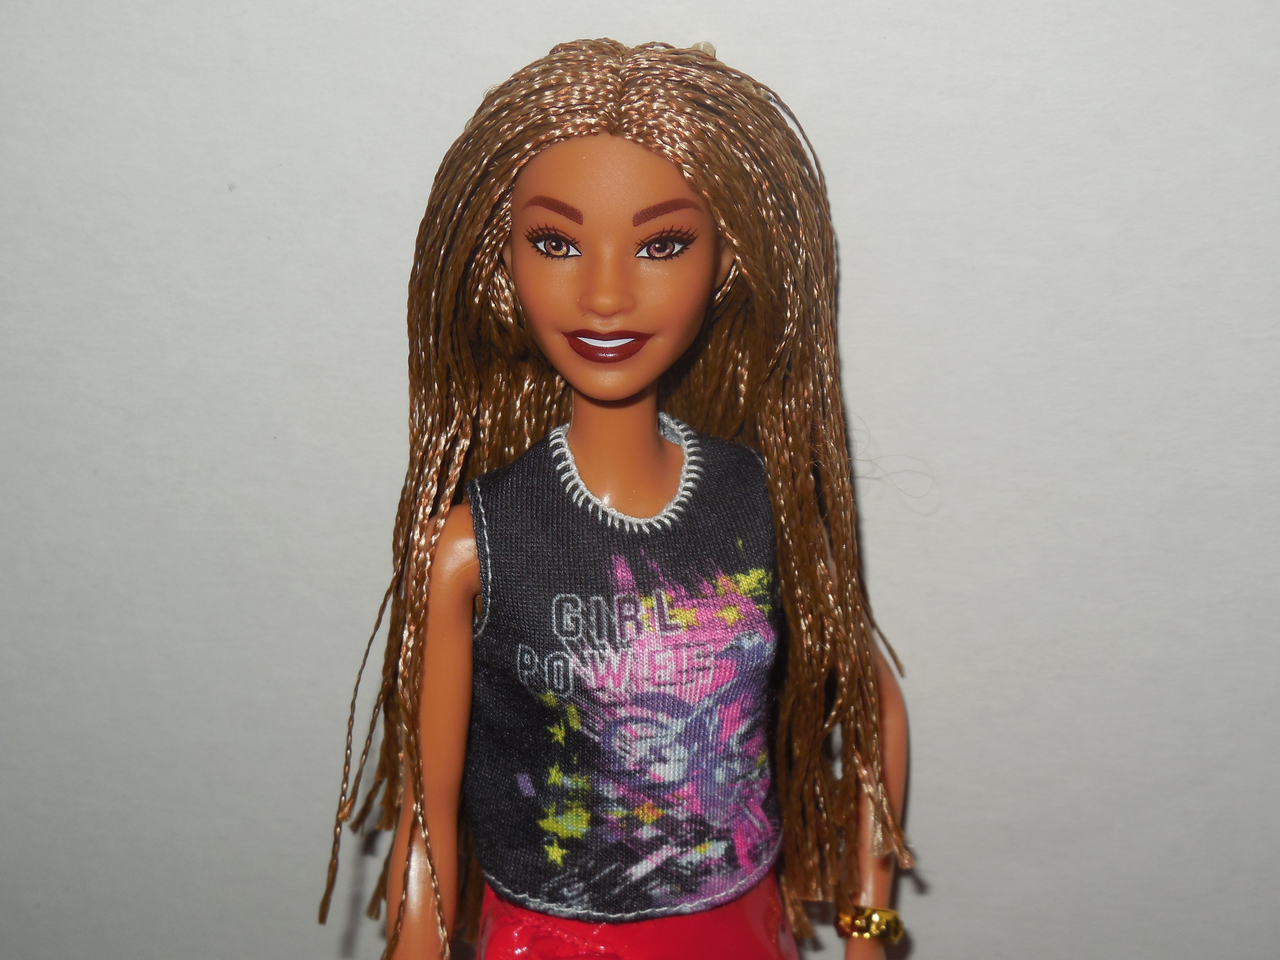 REVIEW: Barbie Fashionistas 122, 123, 124 and 126 